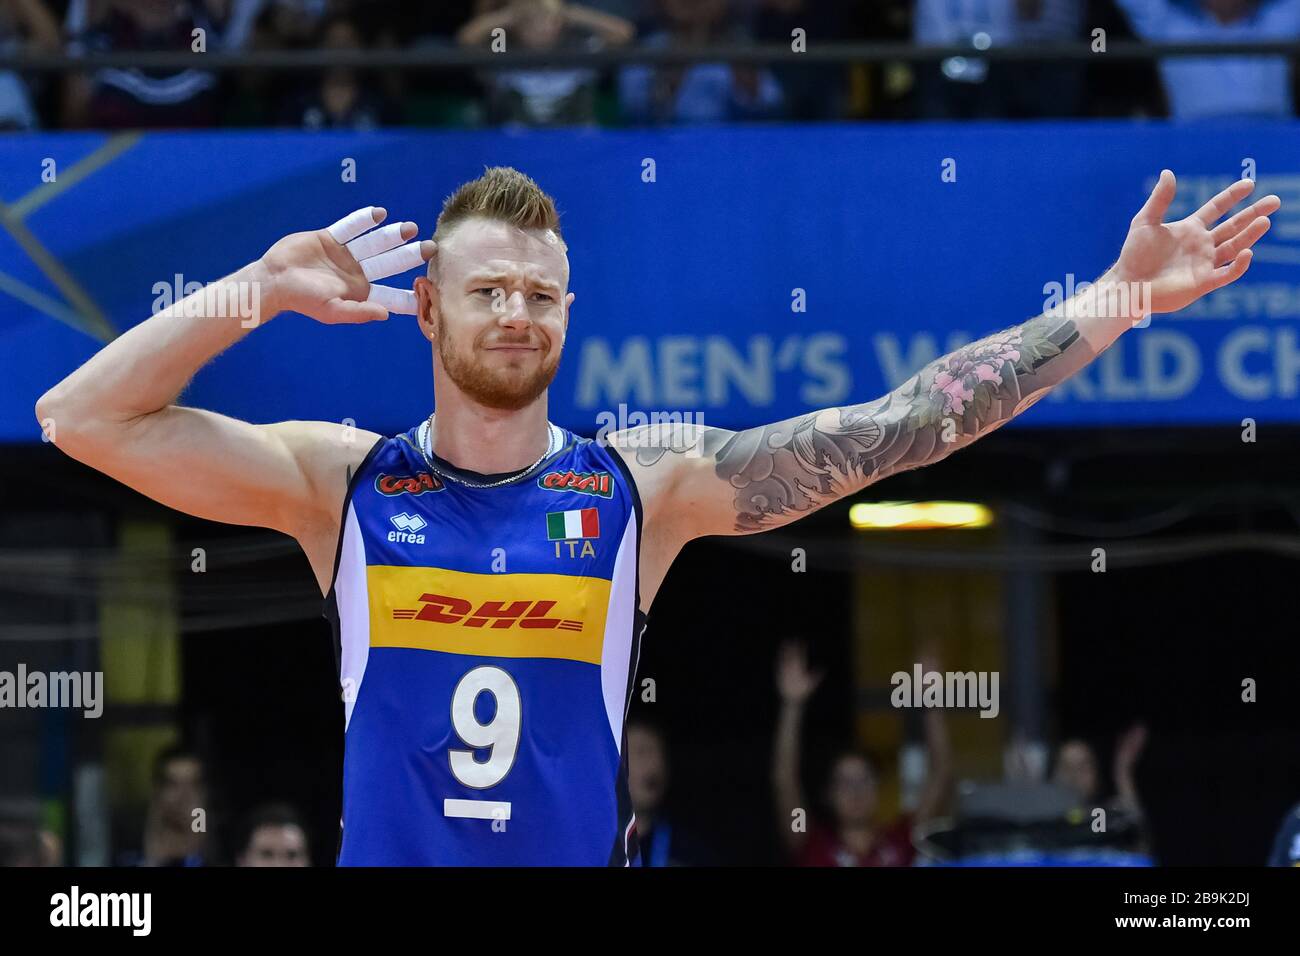 ivan zaytsev during Volleyball Men Italy Team season 2019/20, italy, Italy, 01 Jan 2020, Volleyball Italian Volleyball National Team Stock Photo -